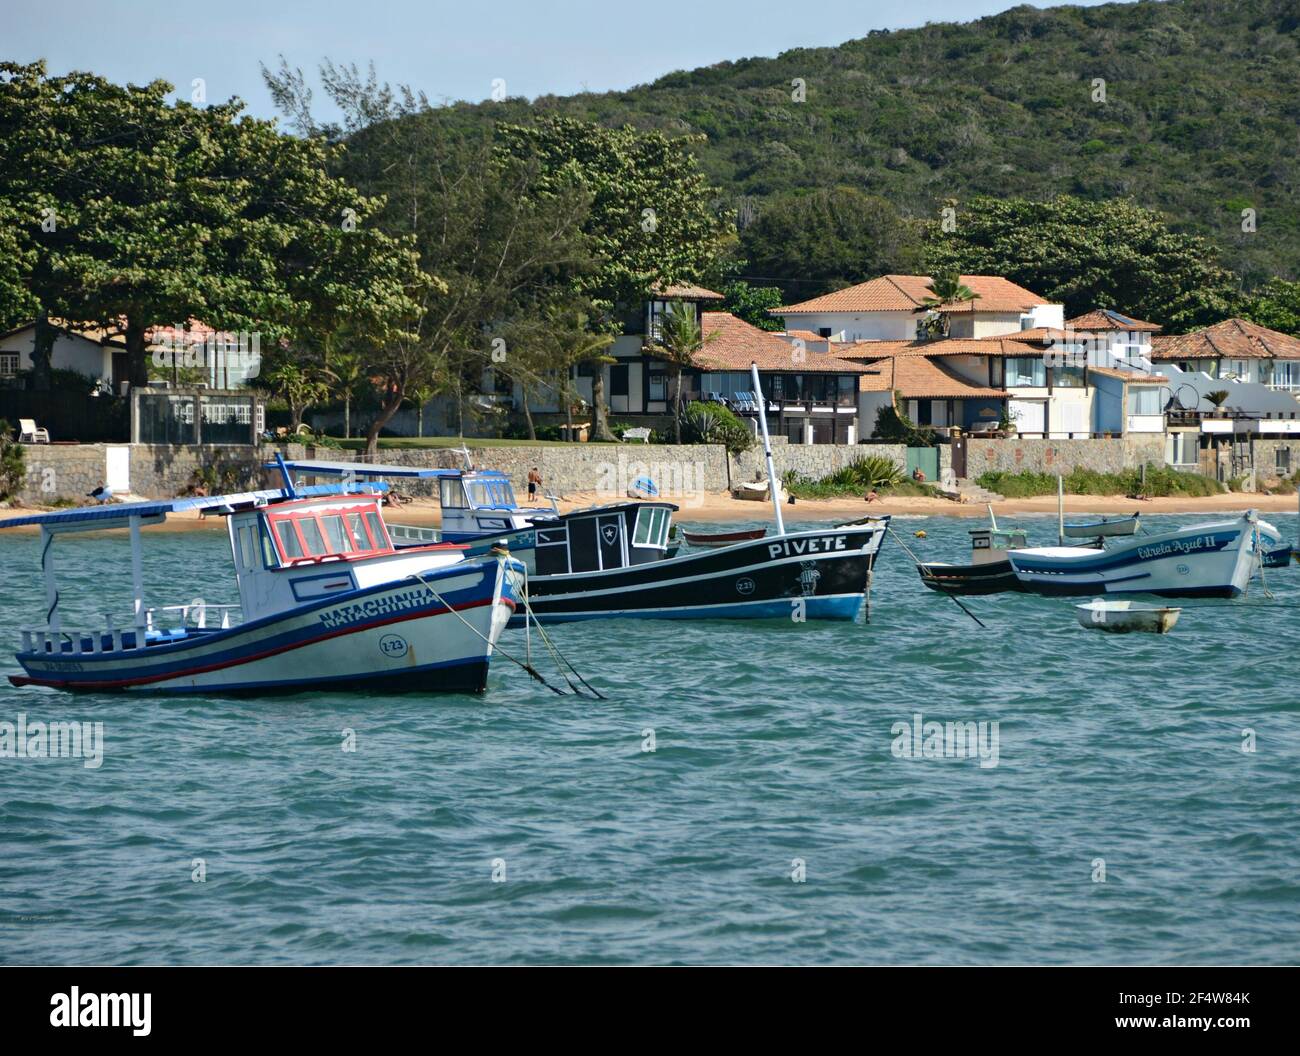 Landscape with view of traditional fishing boats on the waters of Armação dos Búzios, the renown resort town of Rio de Janeiro, Brazil. Stock Photo